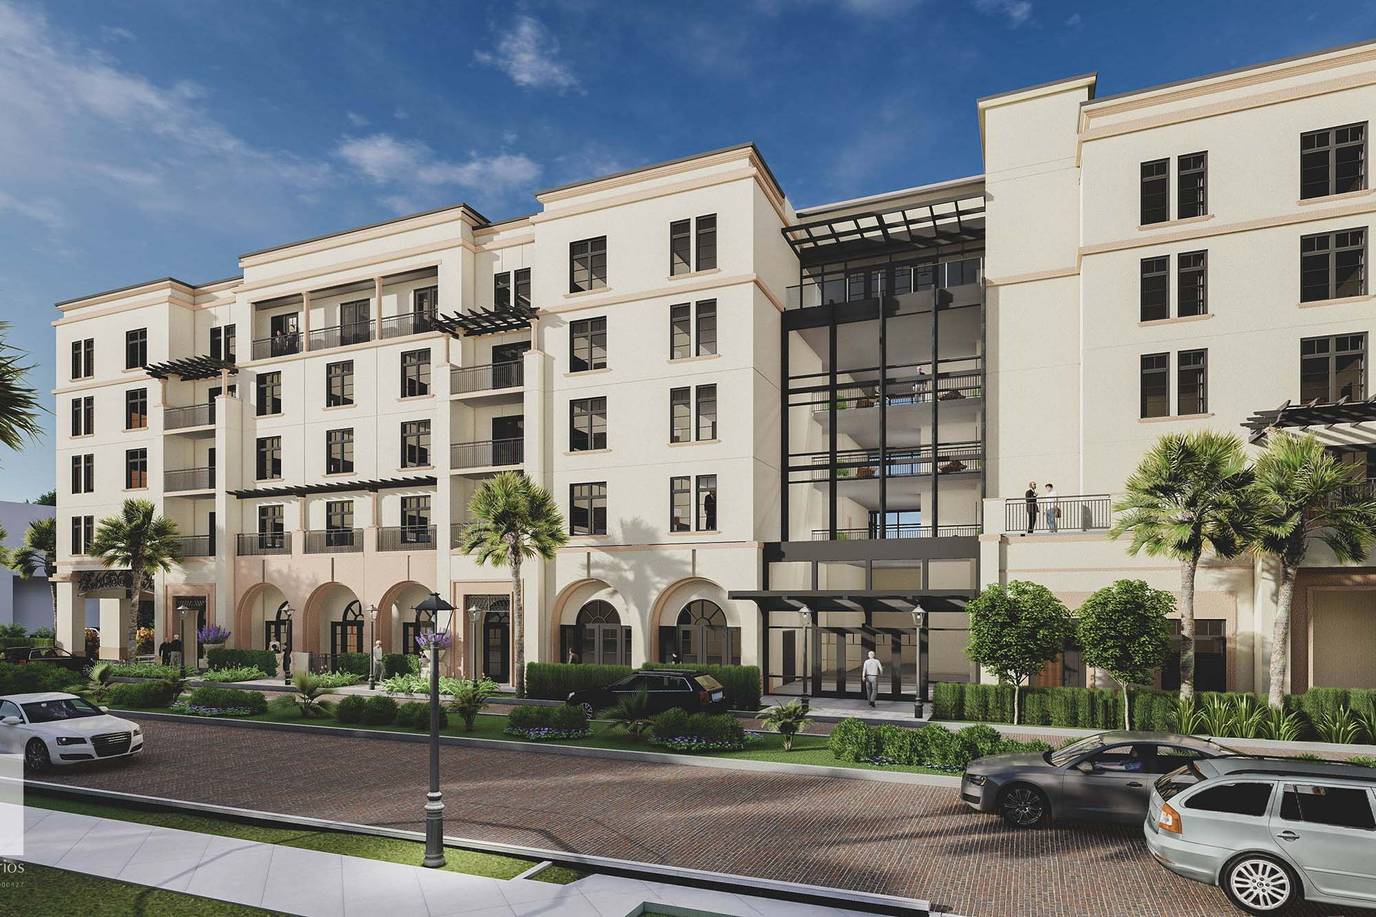 An artist's rendering of the new Alfond Inn at Rollins College.